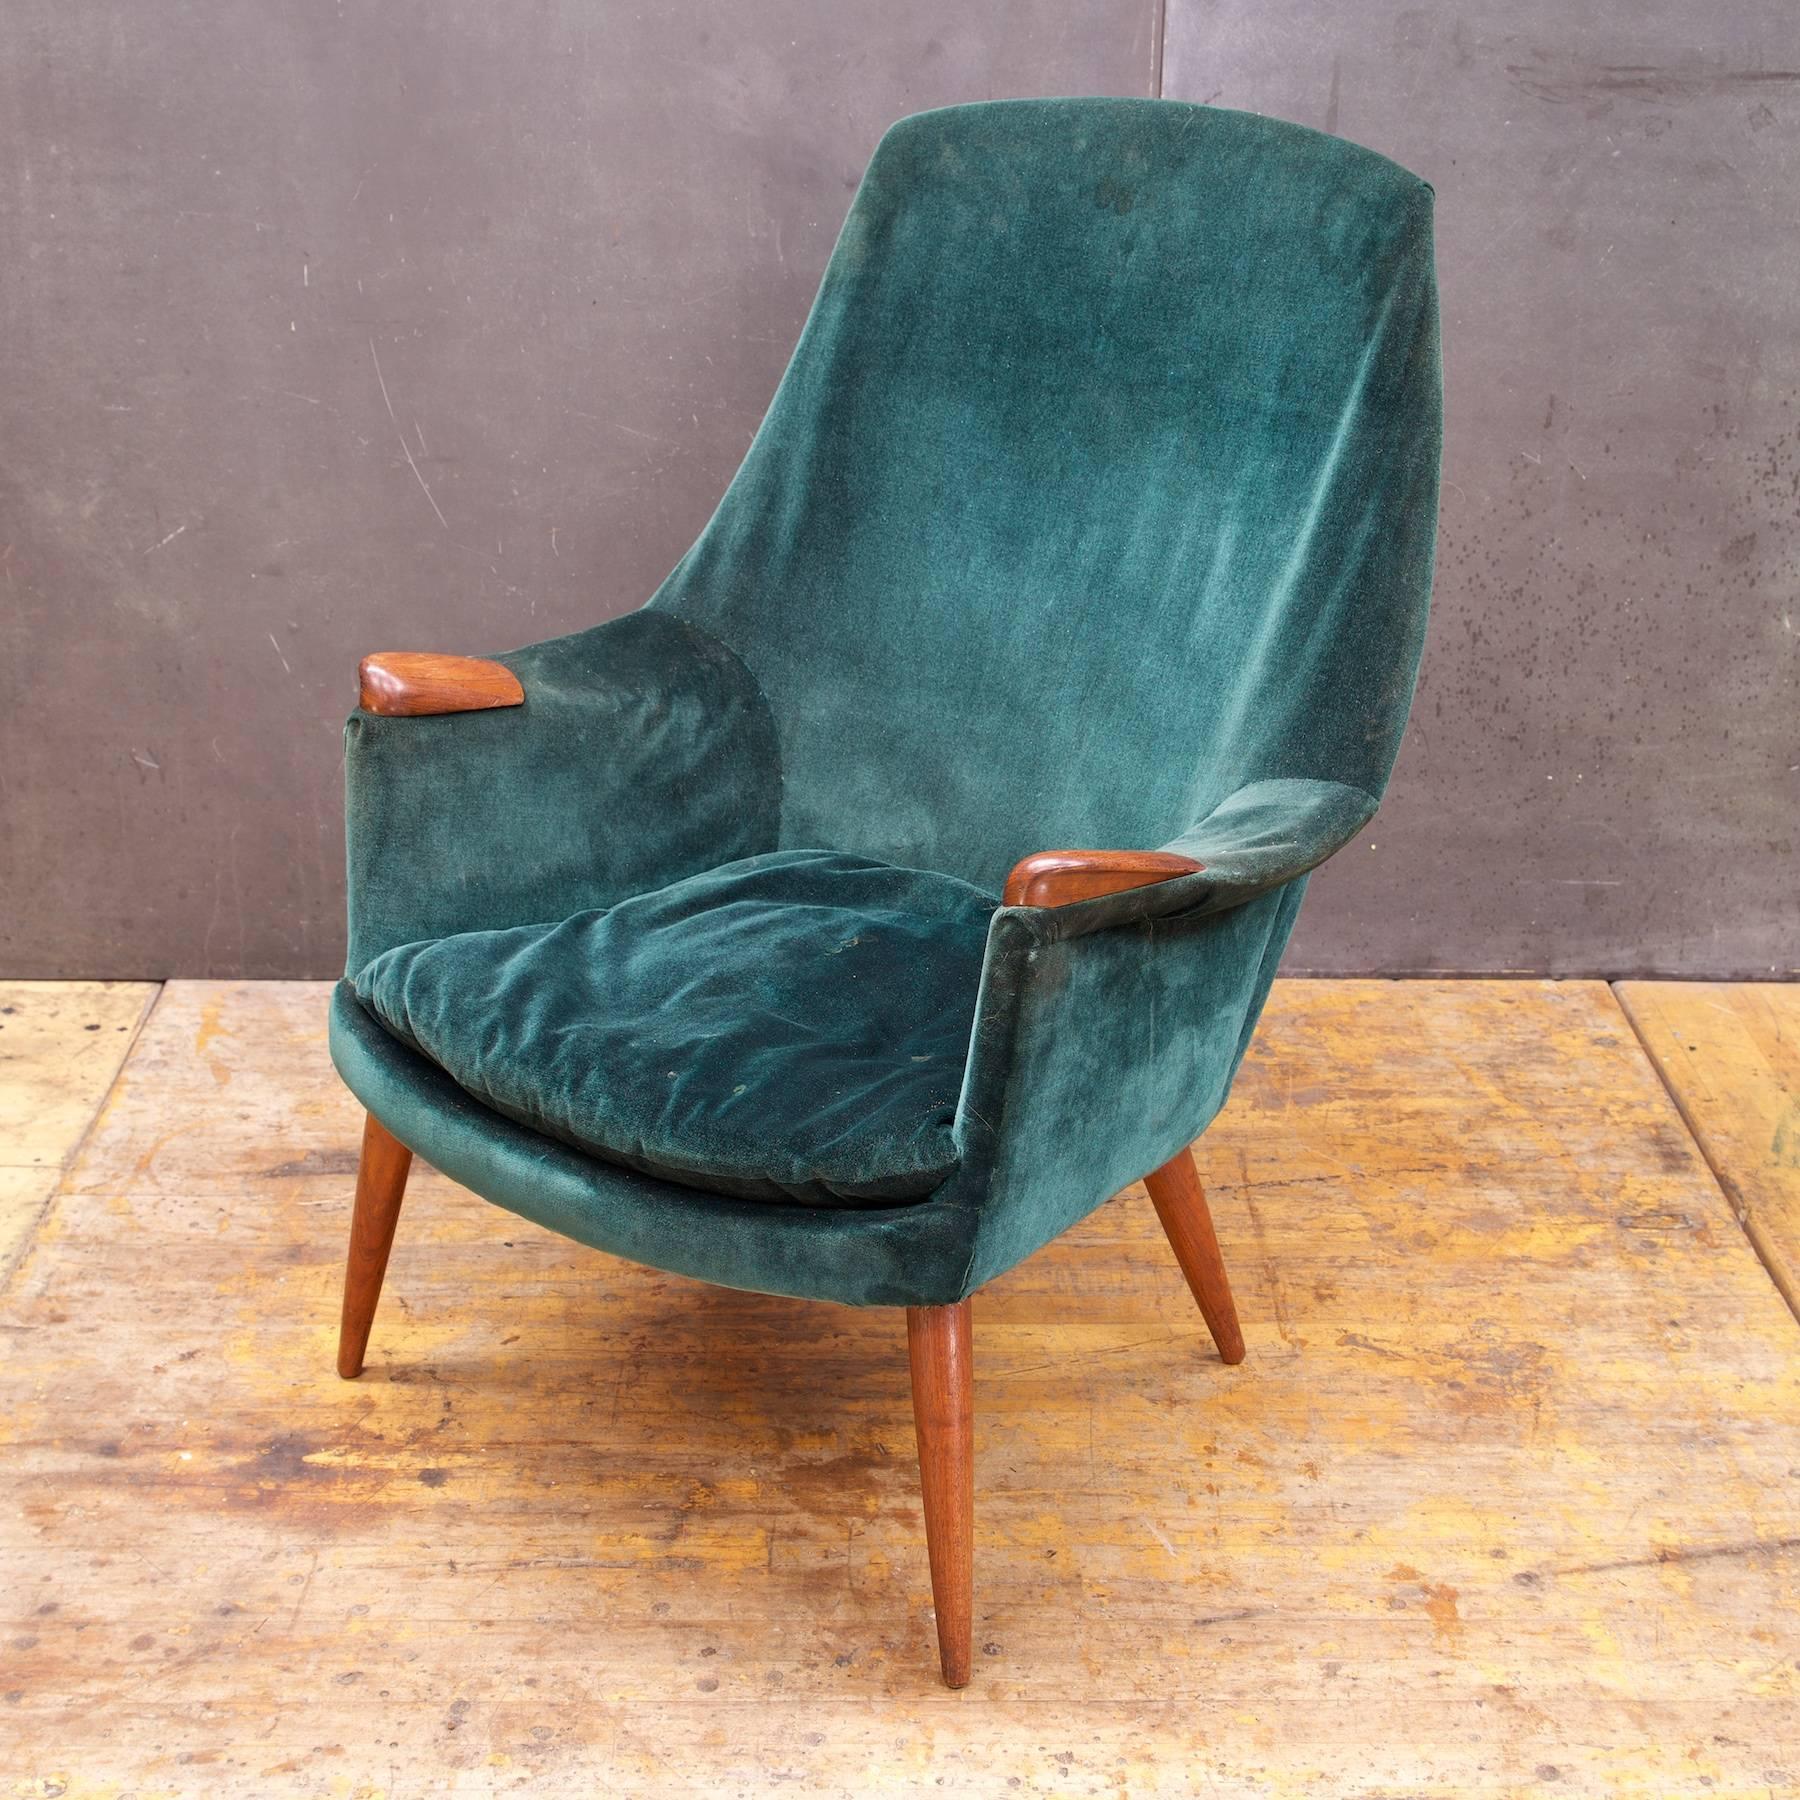 Rare maker, low numbers produced. Rare early version of this chair design.

Selling as project, this chair need re-upholstery, so it is ready for your home, should be shipped directly to your upholsterer.